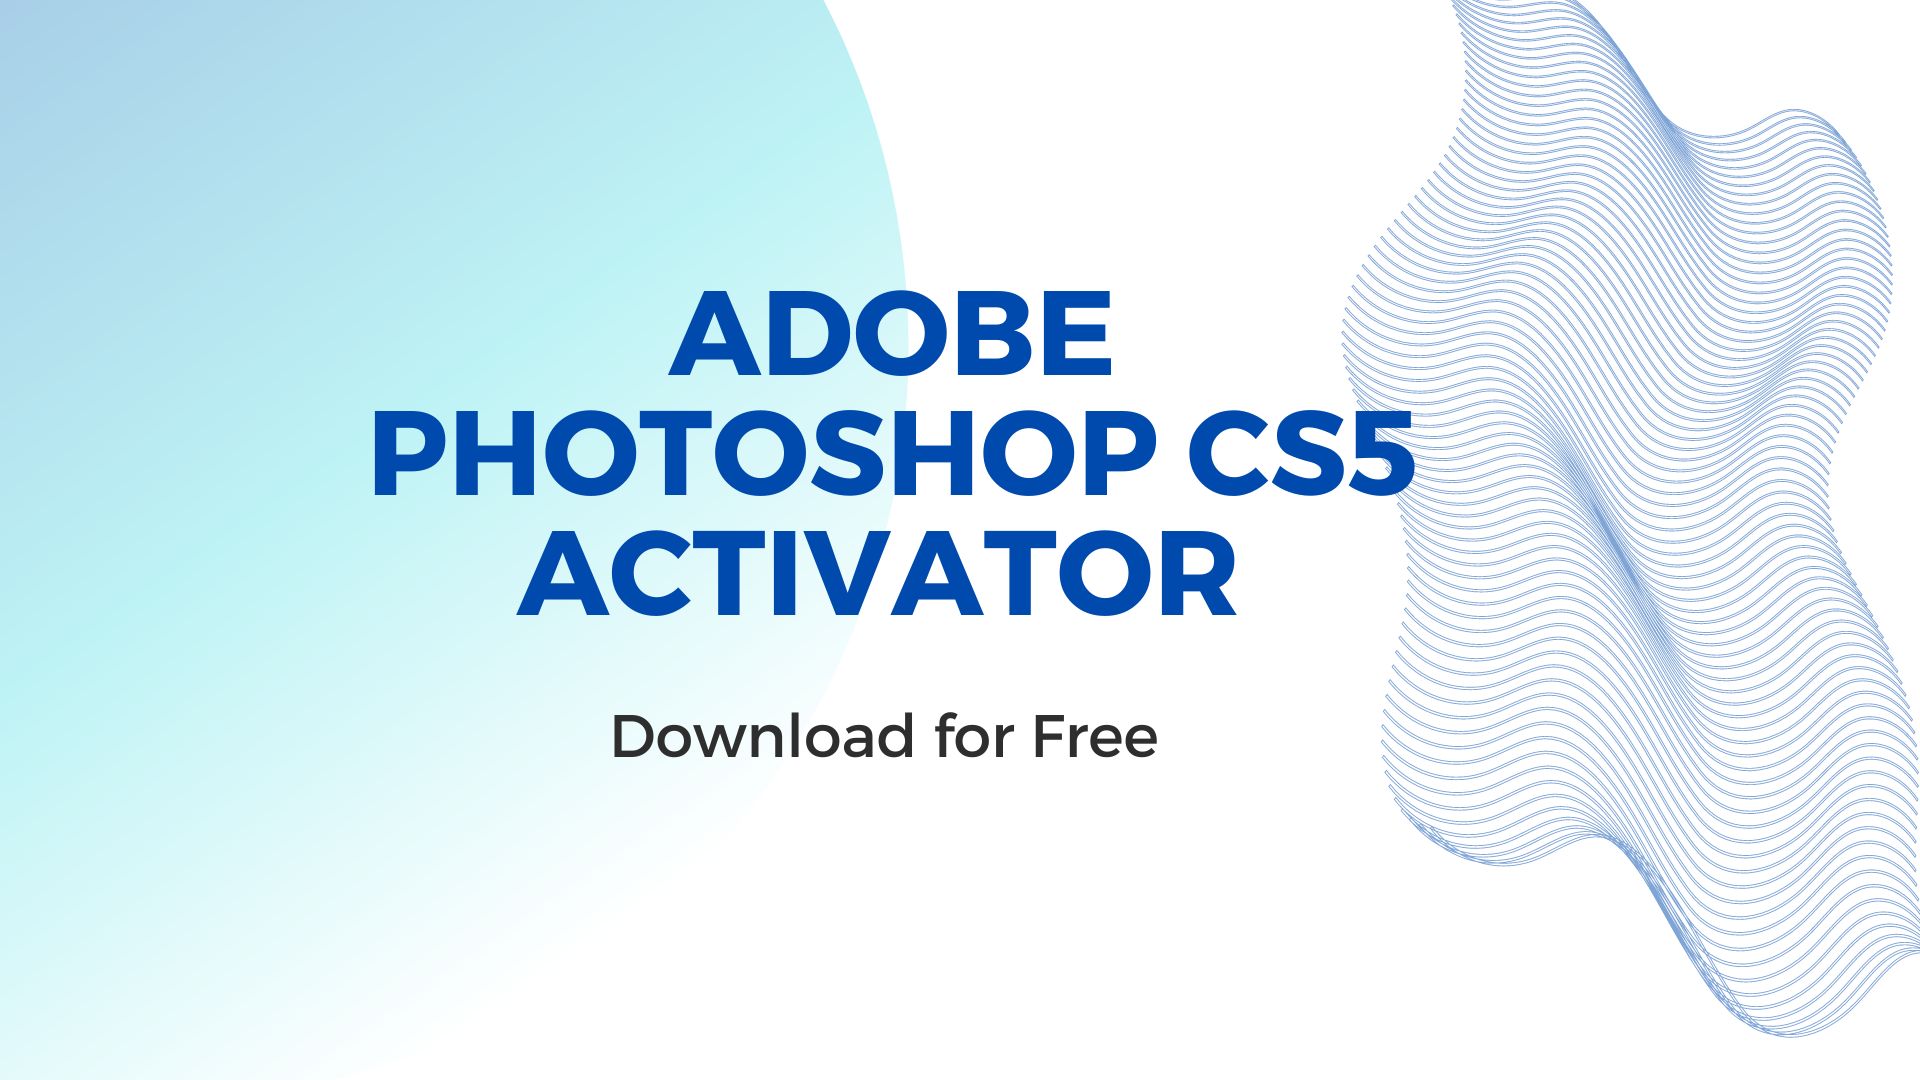 Adobe Photoshop CS5 Activator Download for Free